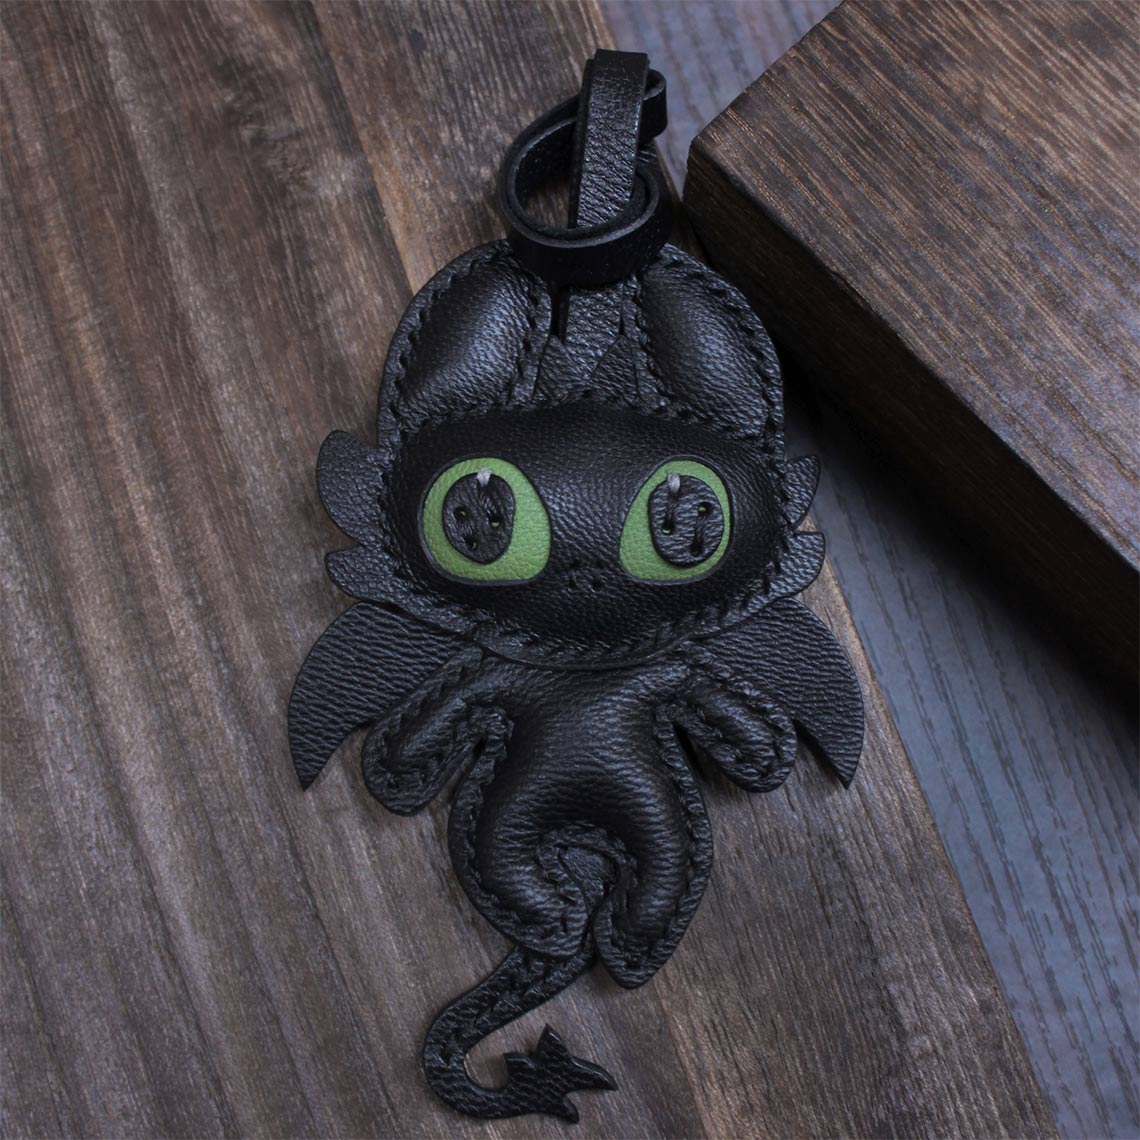 POPSEWING® Sheep Leather Toothless Dragon Keychain DIY Kits